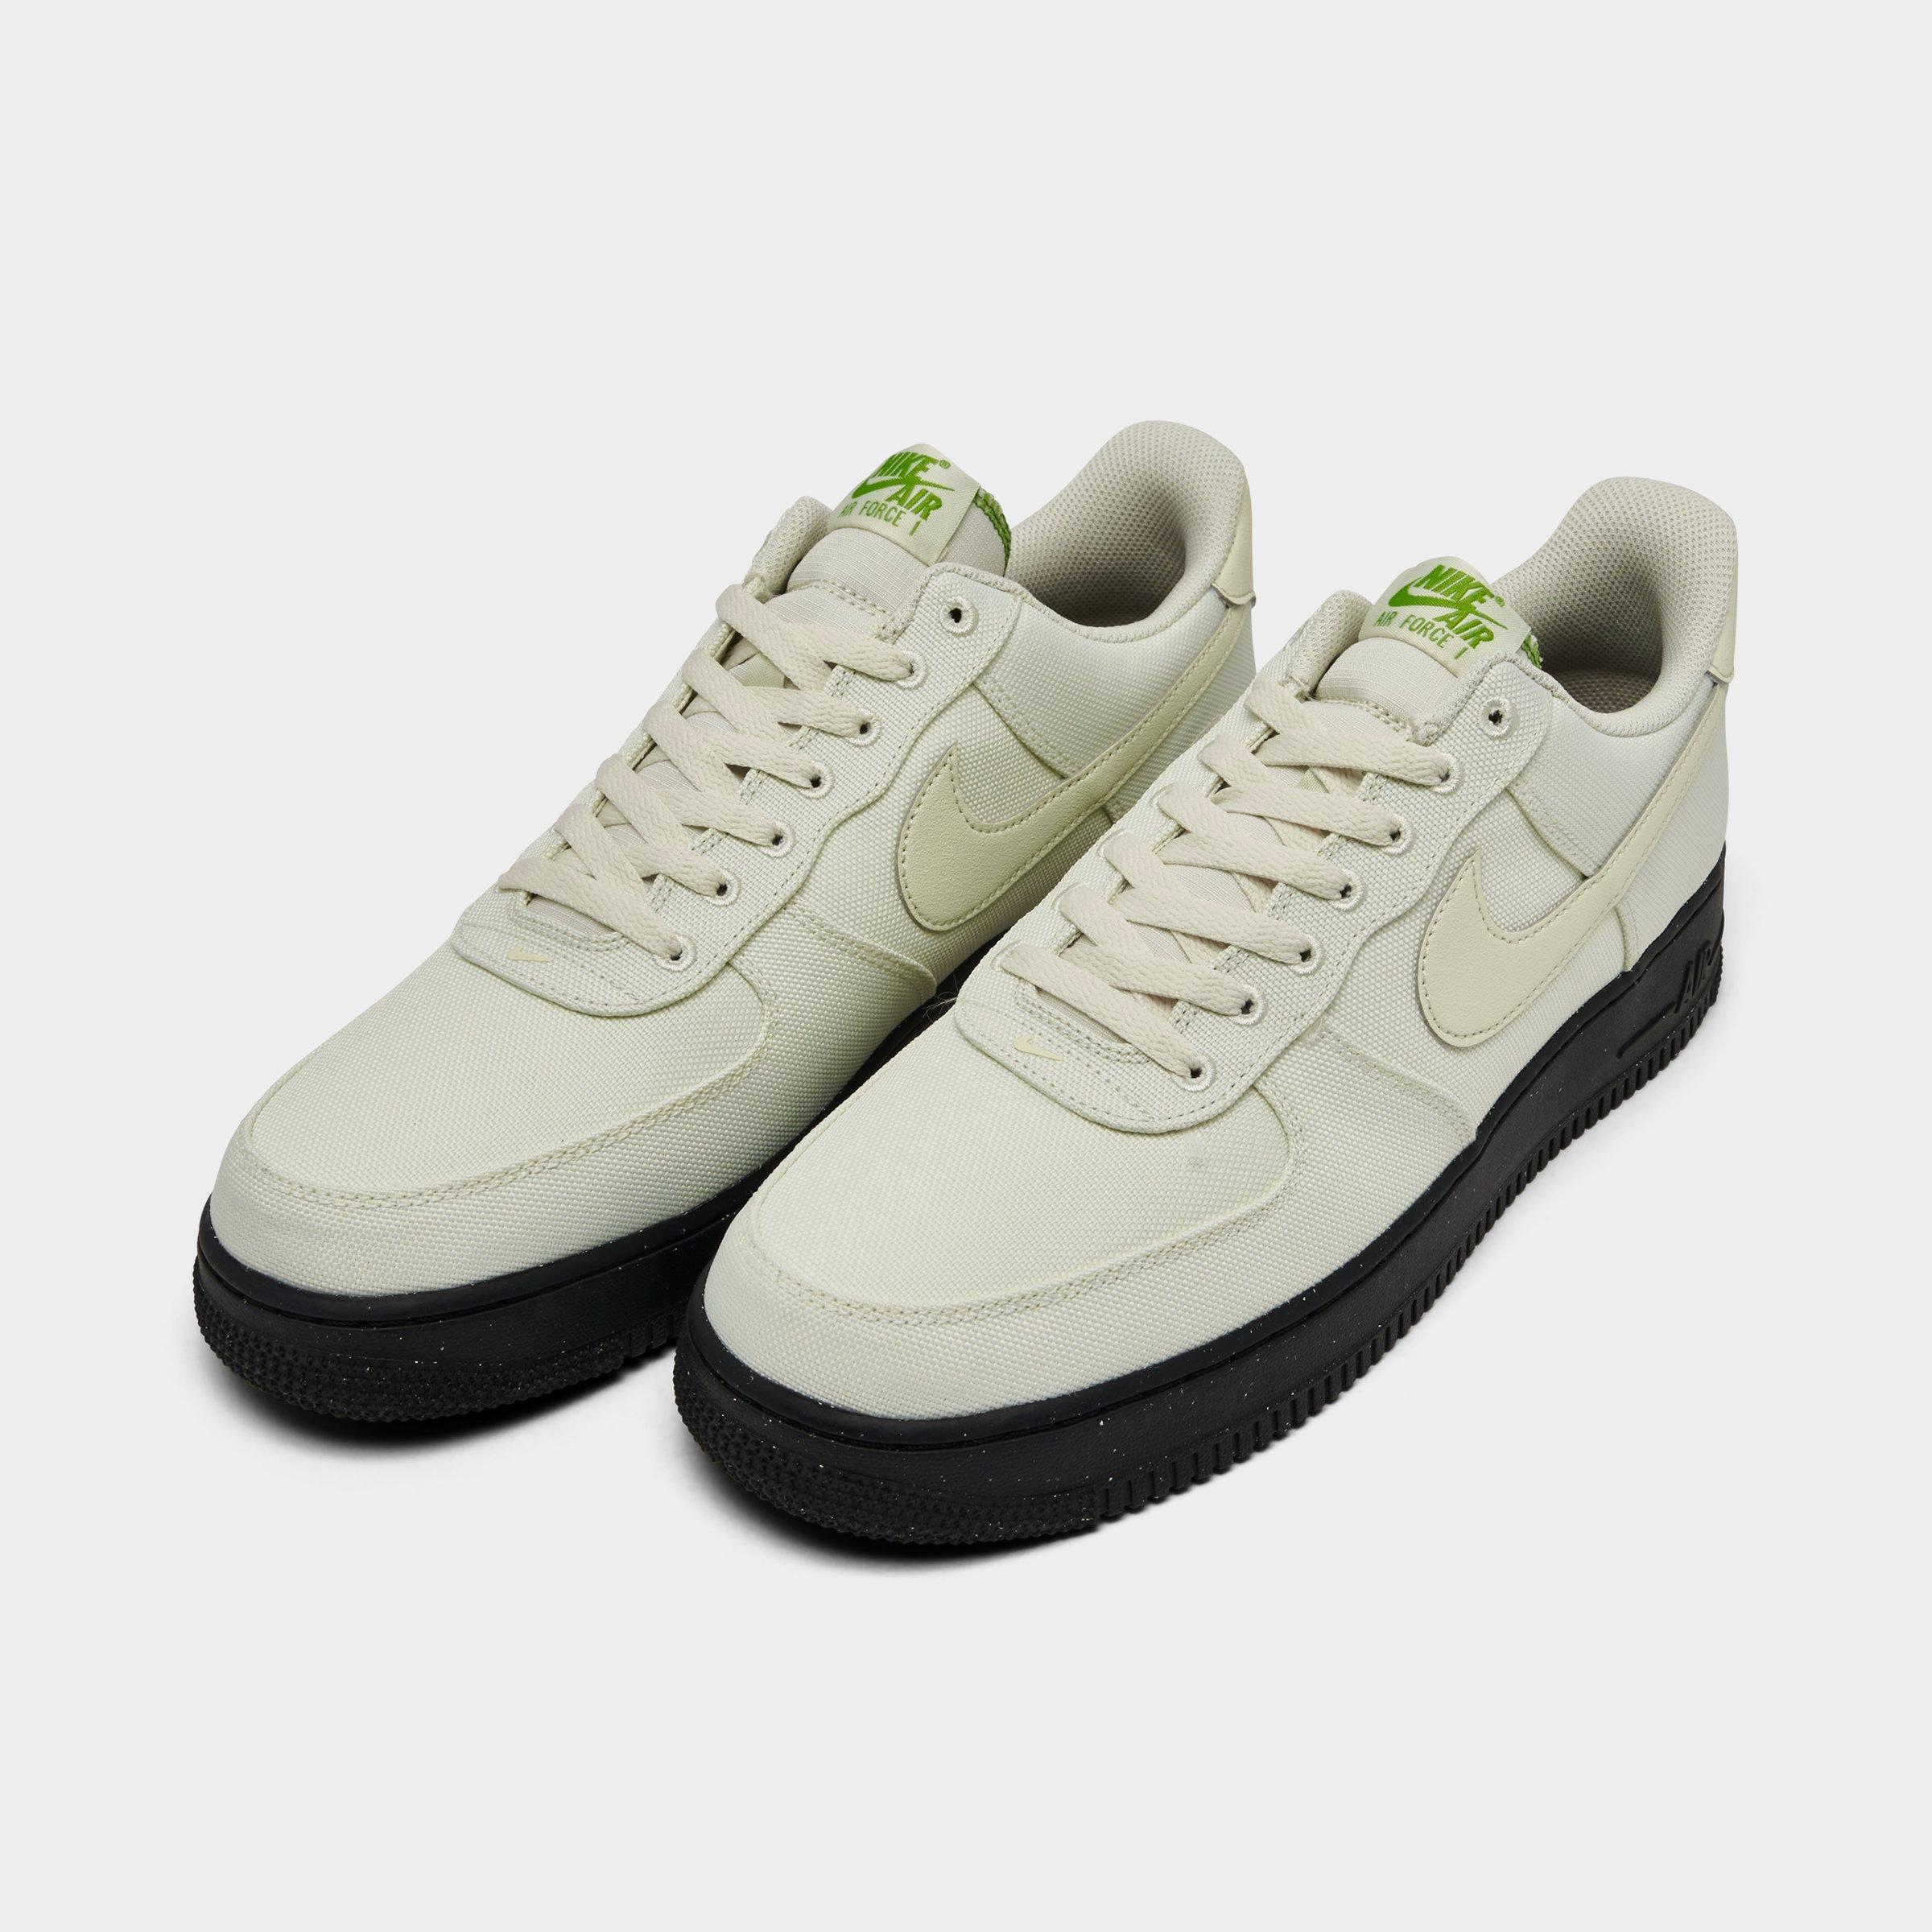 Men's Nike Air Force 1 '07 LV8 SE Canvas Casual Shoes| JD Sports